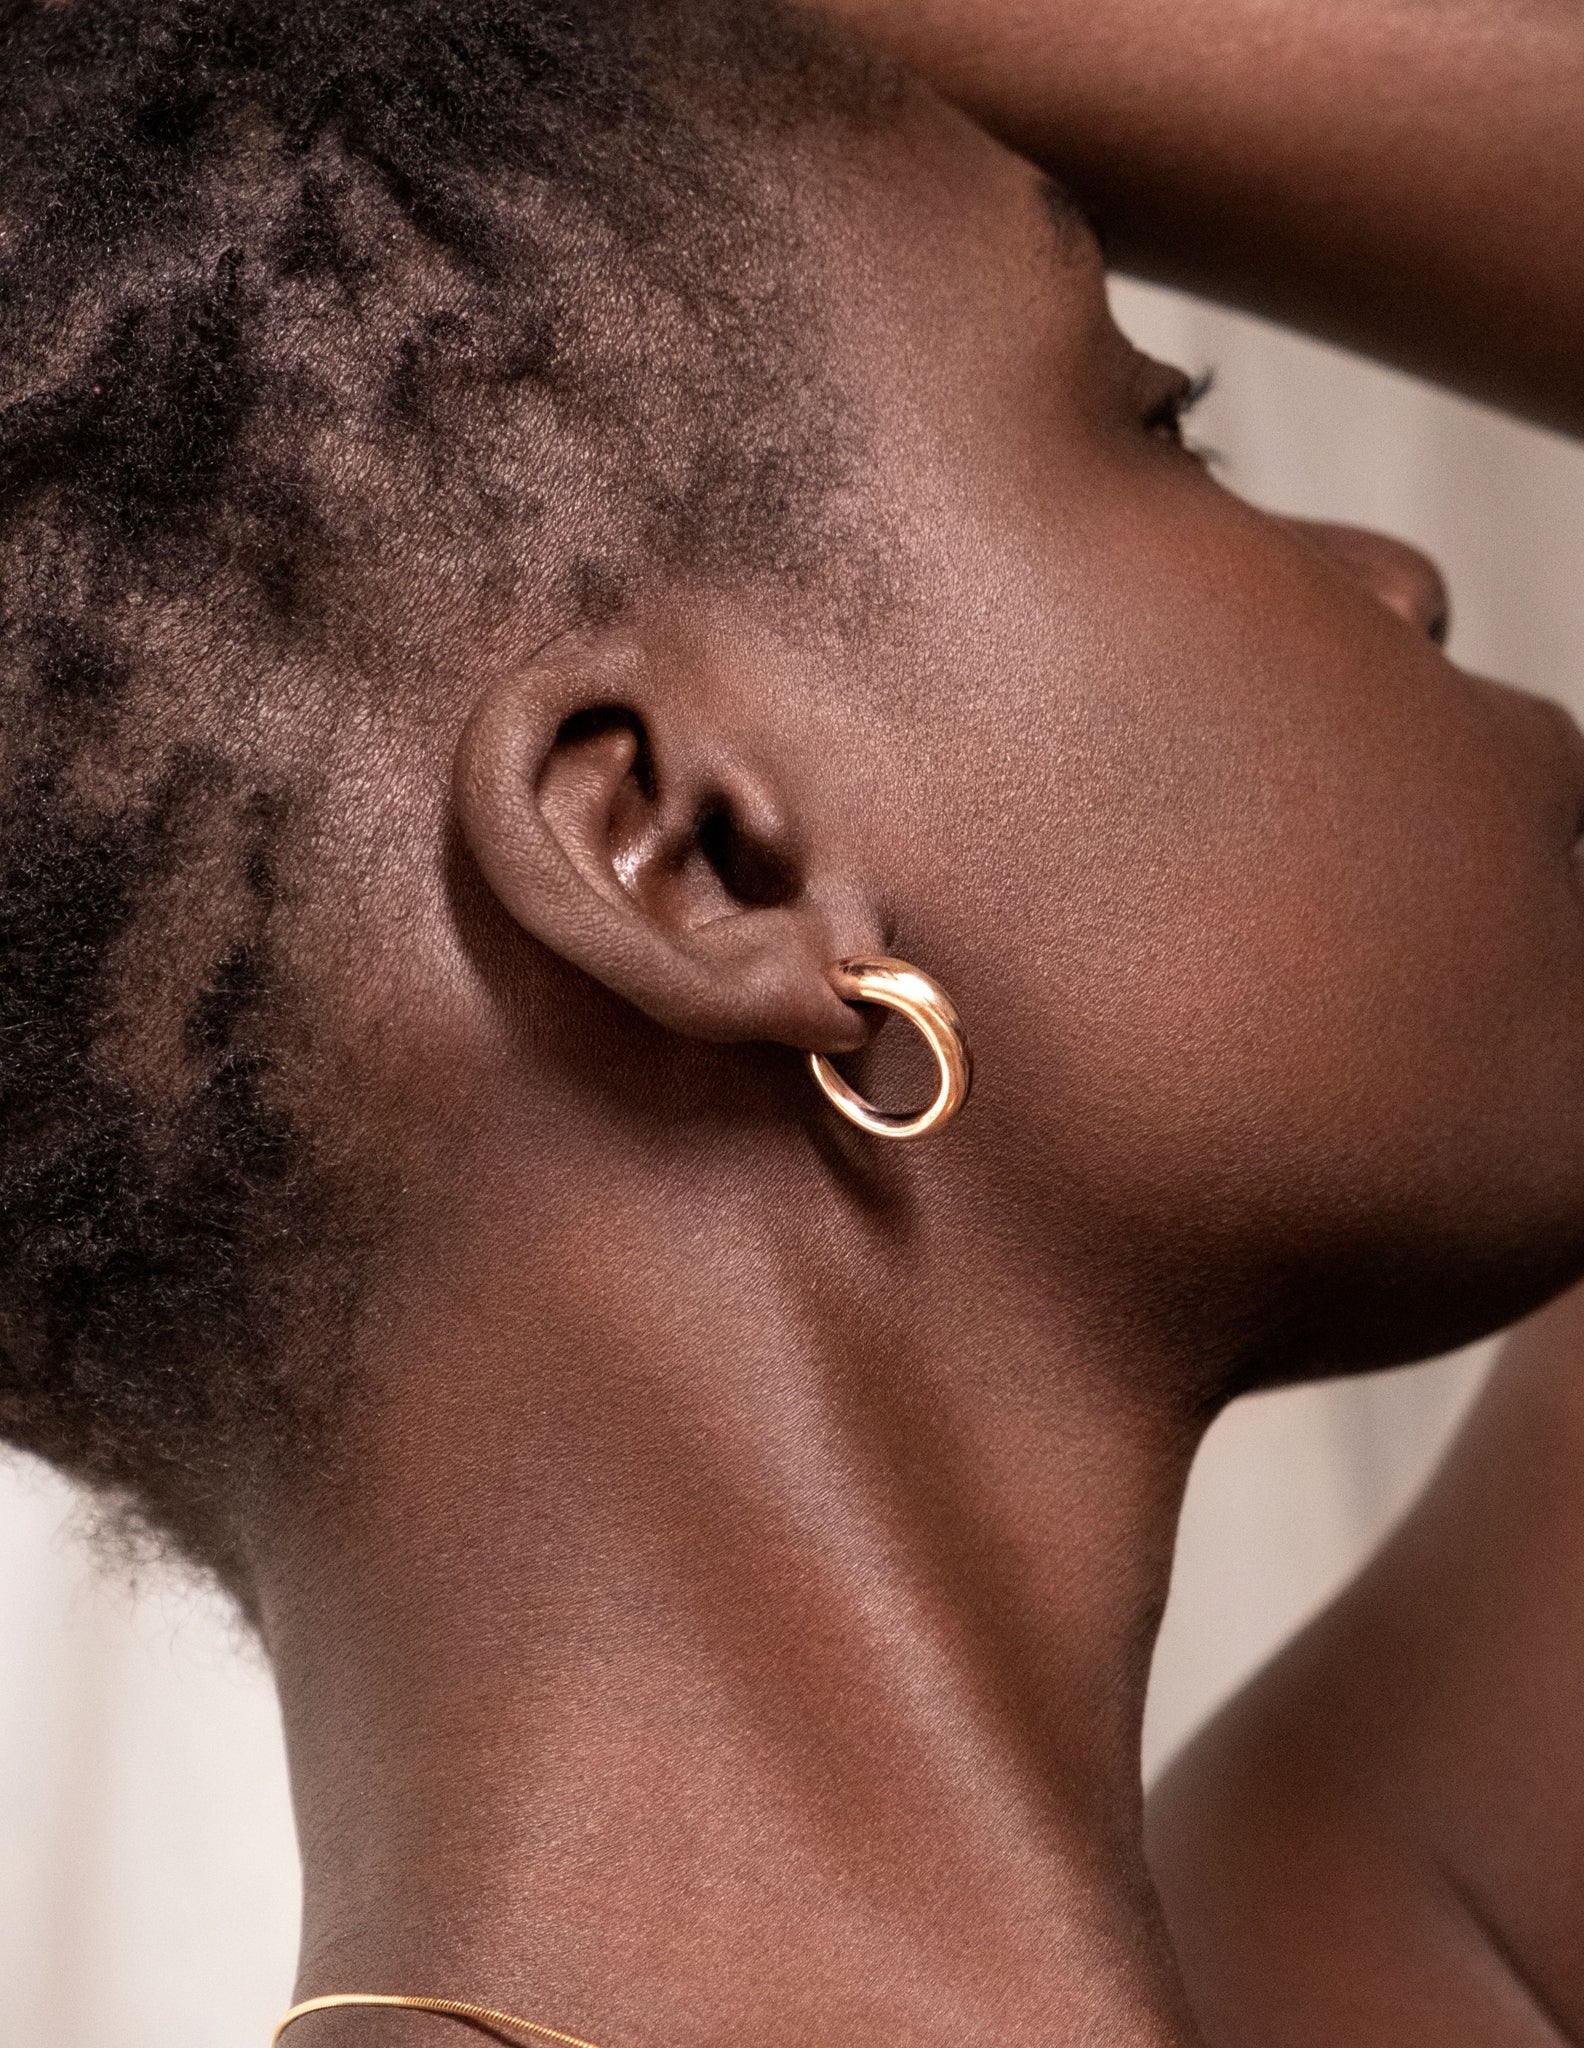 Tiny Khartoum Hoops Nude in Polished Rose Gold Vermeil